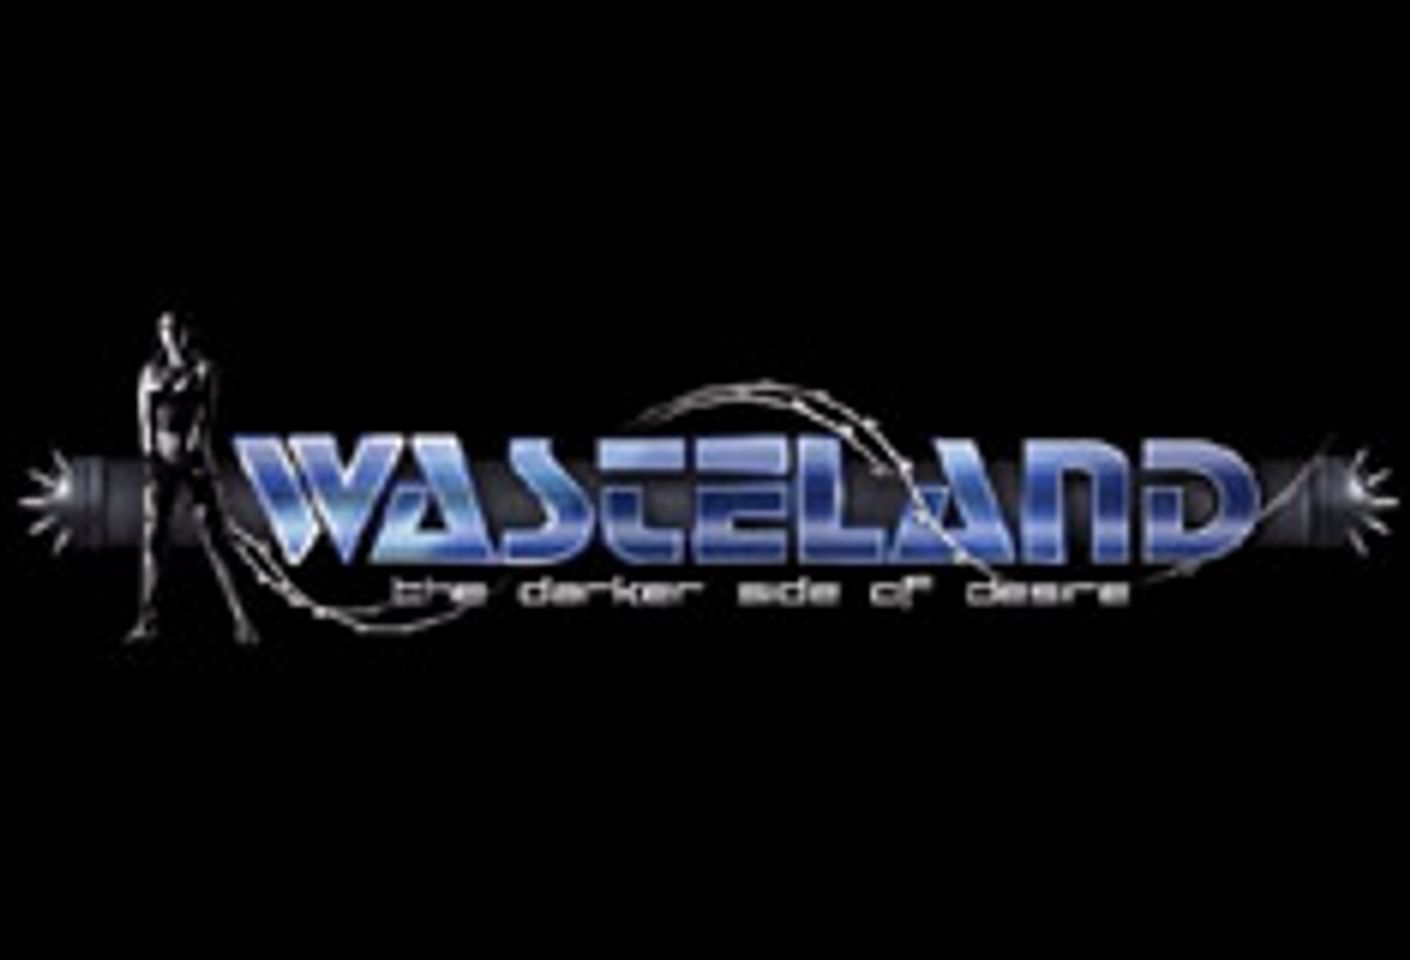 DVDs For Retail, Full-Length Film Production Coming: Wasteland.com